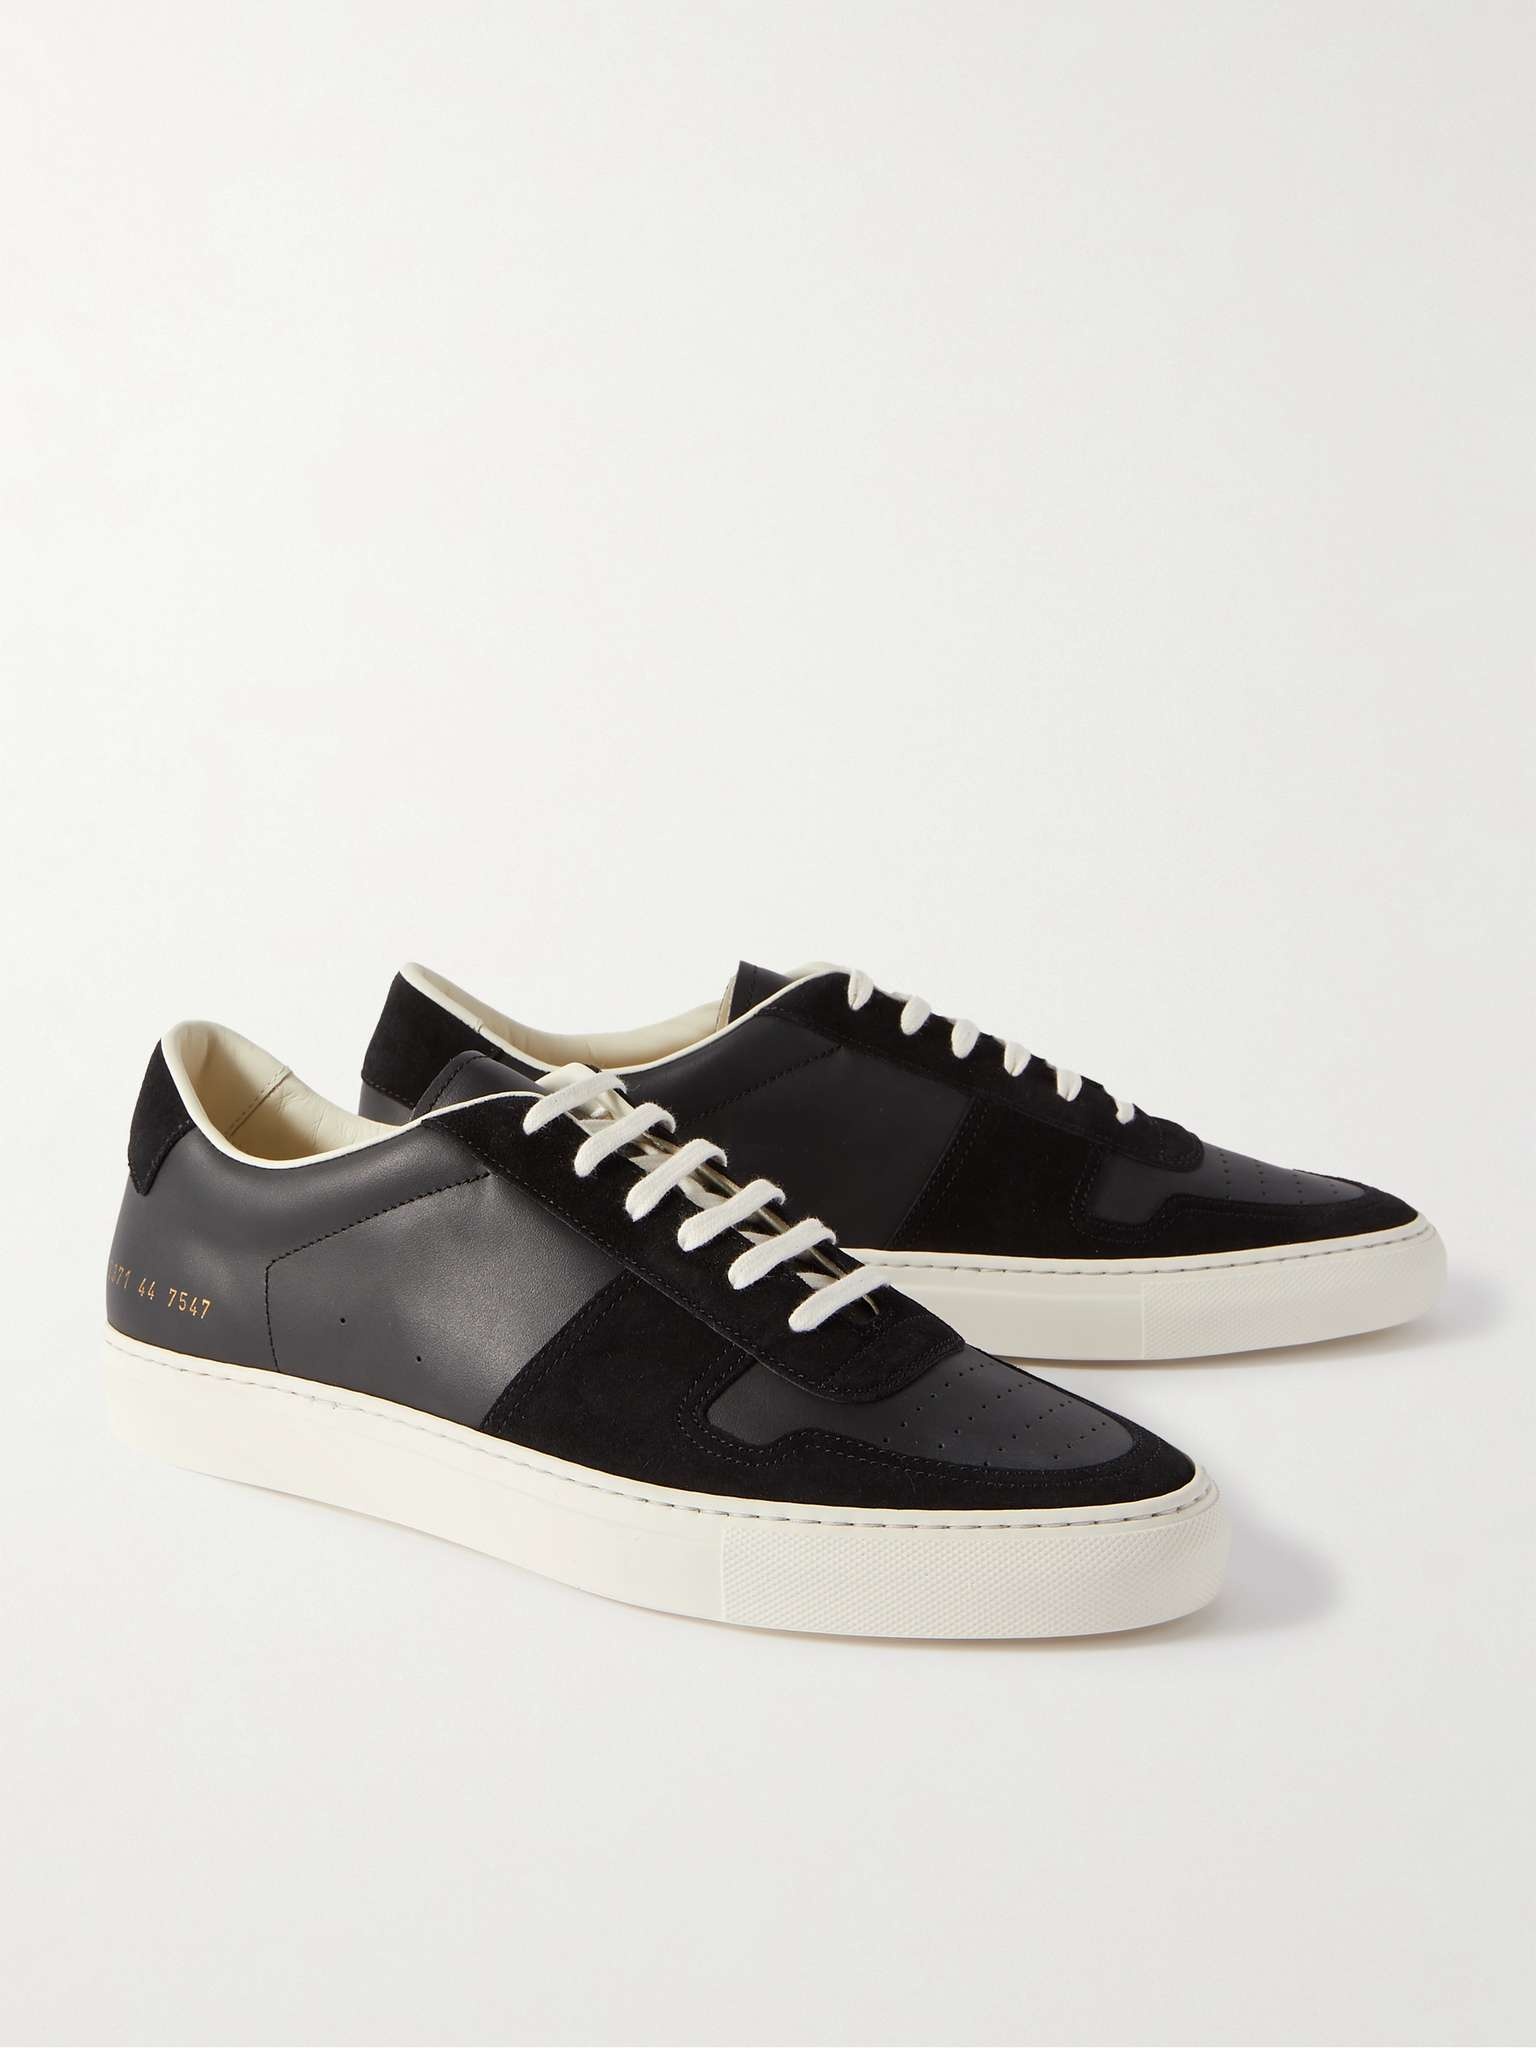 Bball Suede-Trimmed Leather Sneakers - 4